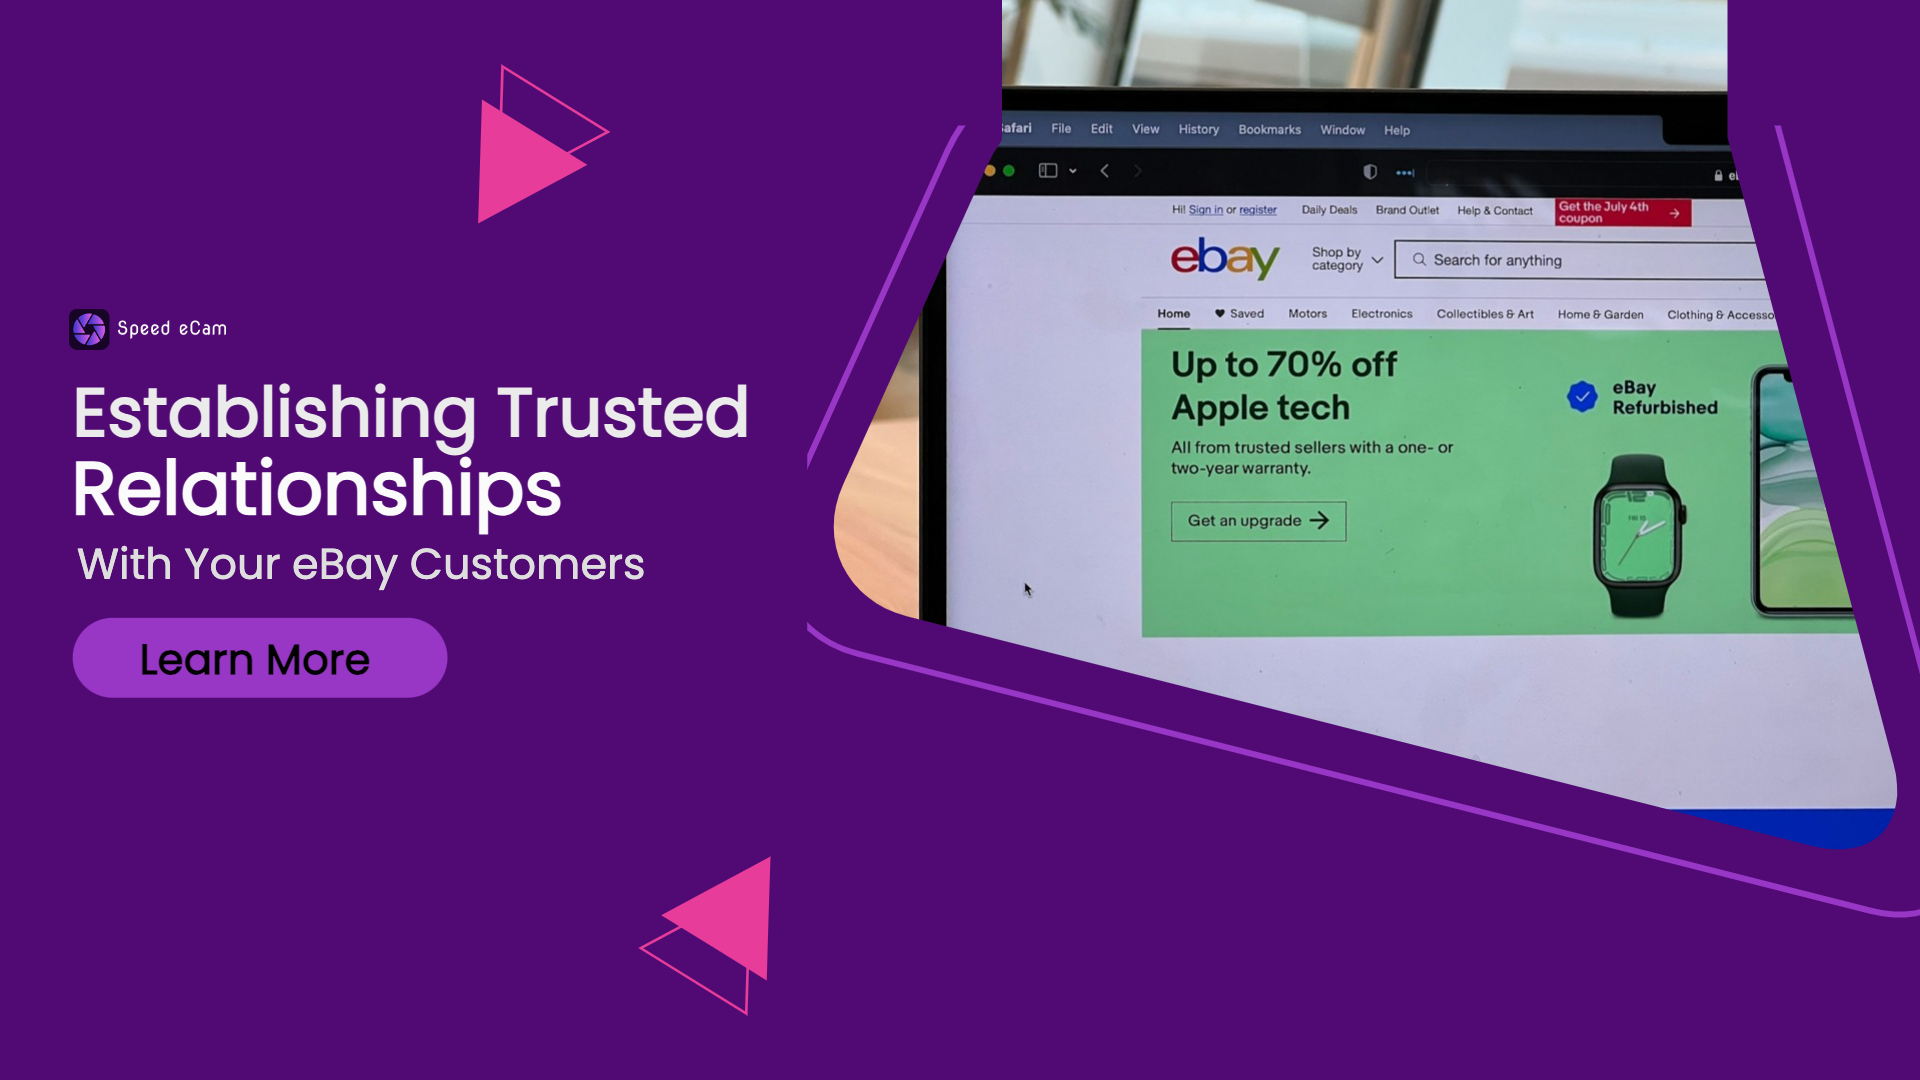 Establishing Trusted Relationships with Your eBay Customers